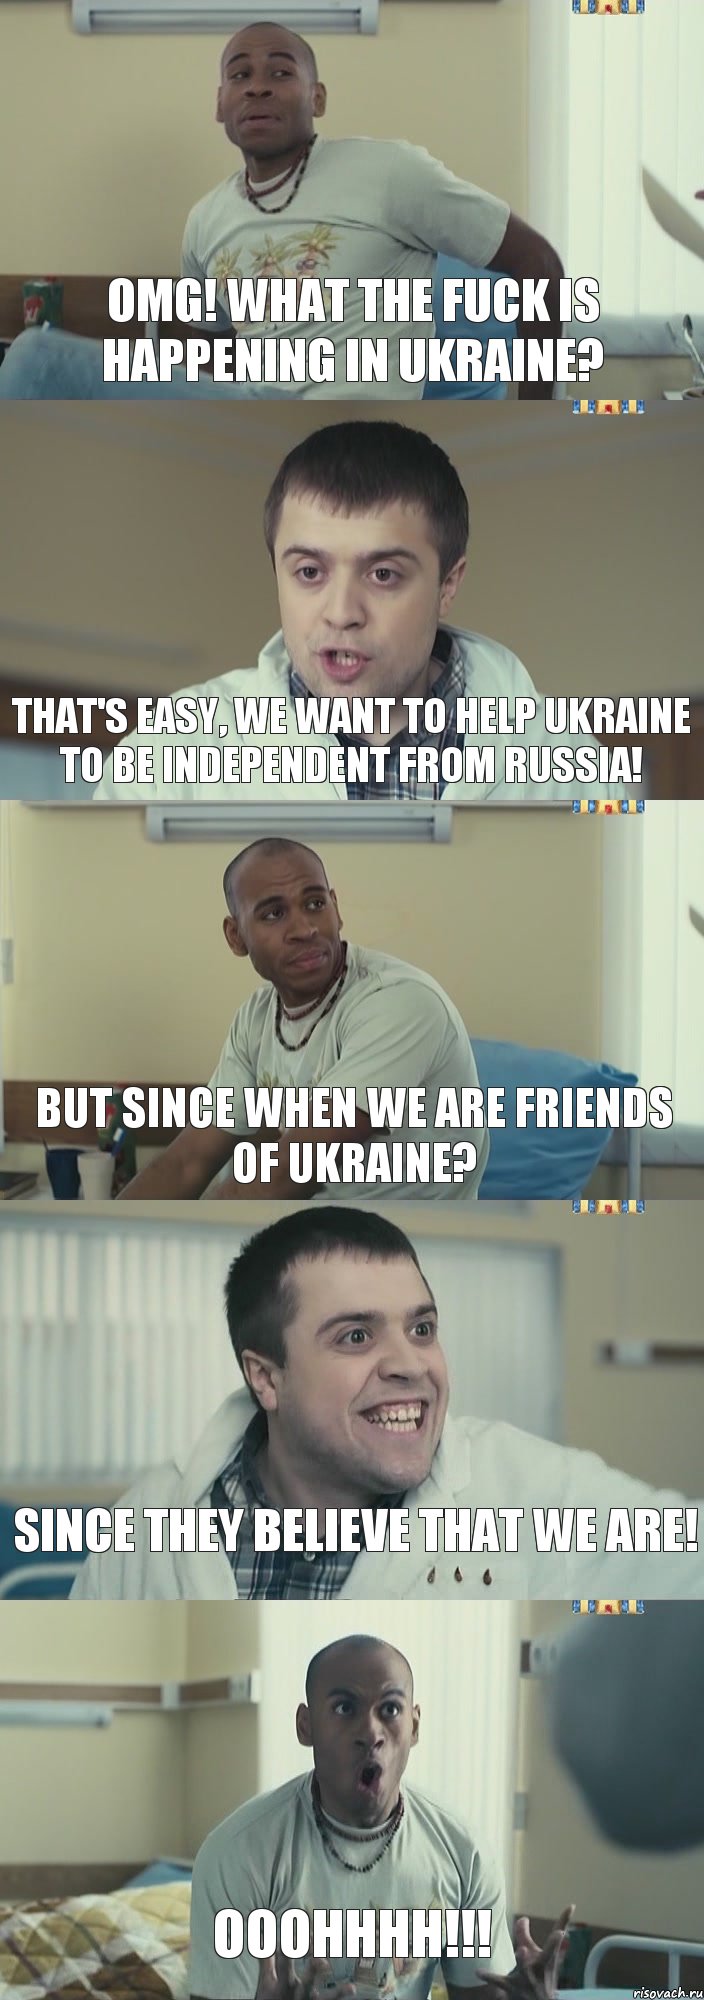 OMG! What the fuck is happening in Ukraine? That's easy, we want to help Ukraine to be independent from Russia! But since when we are friends of Ukraine? Since they believe that we are! OOOHHHH!!!, Комикс Интерны